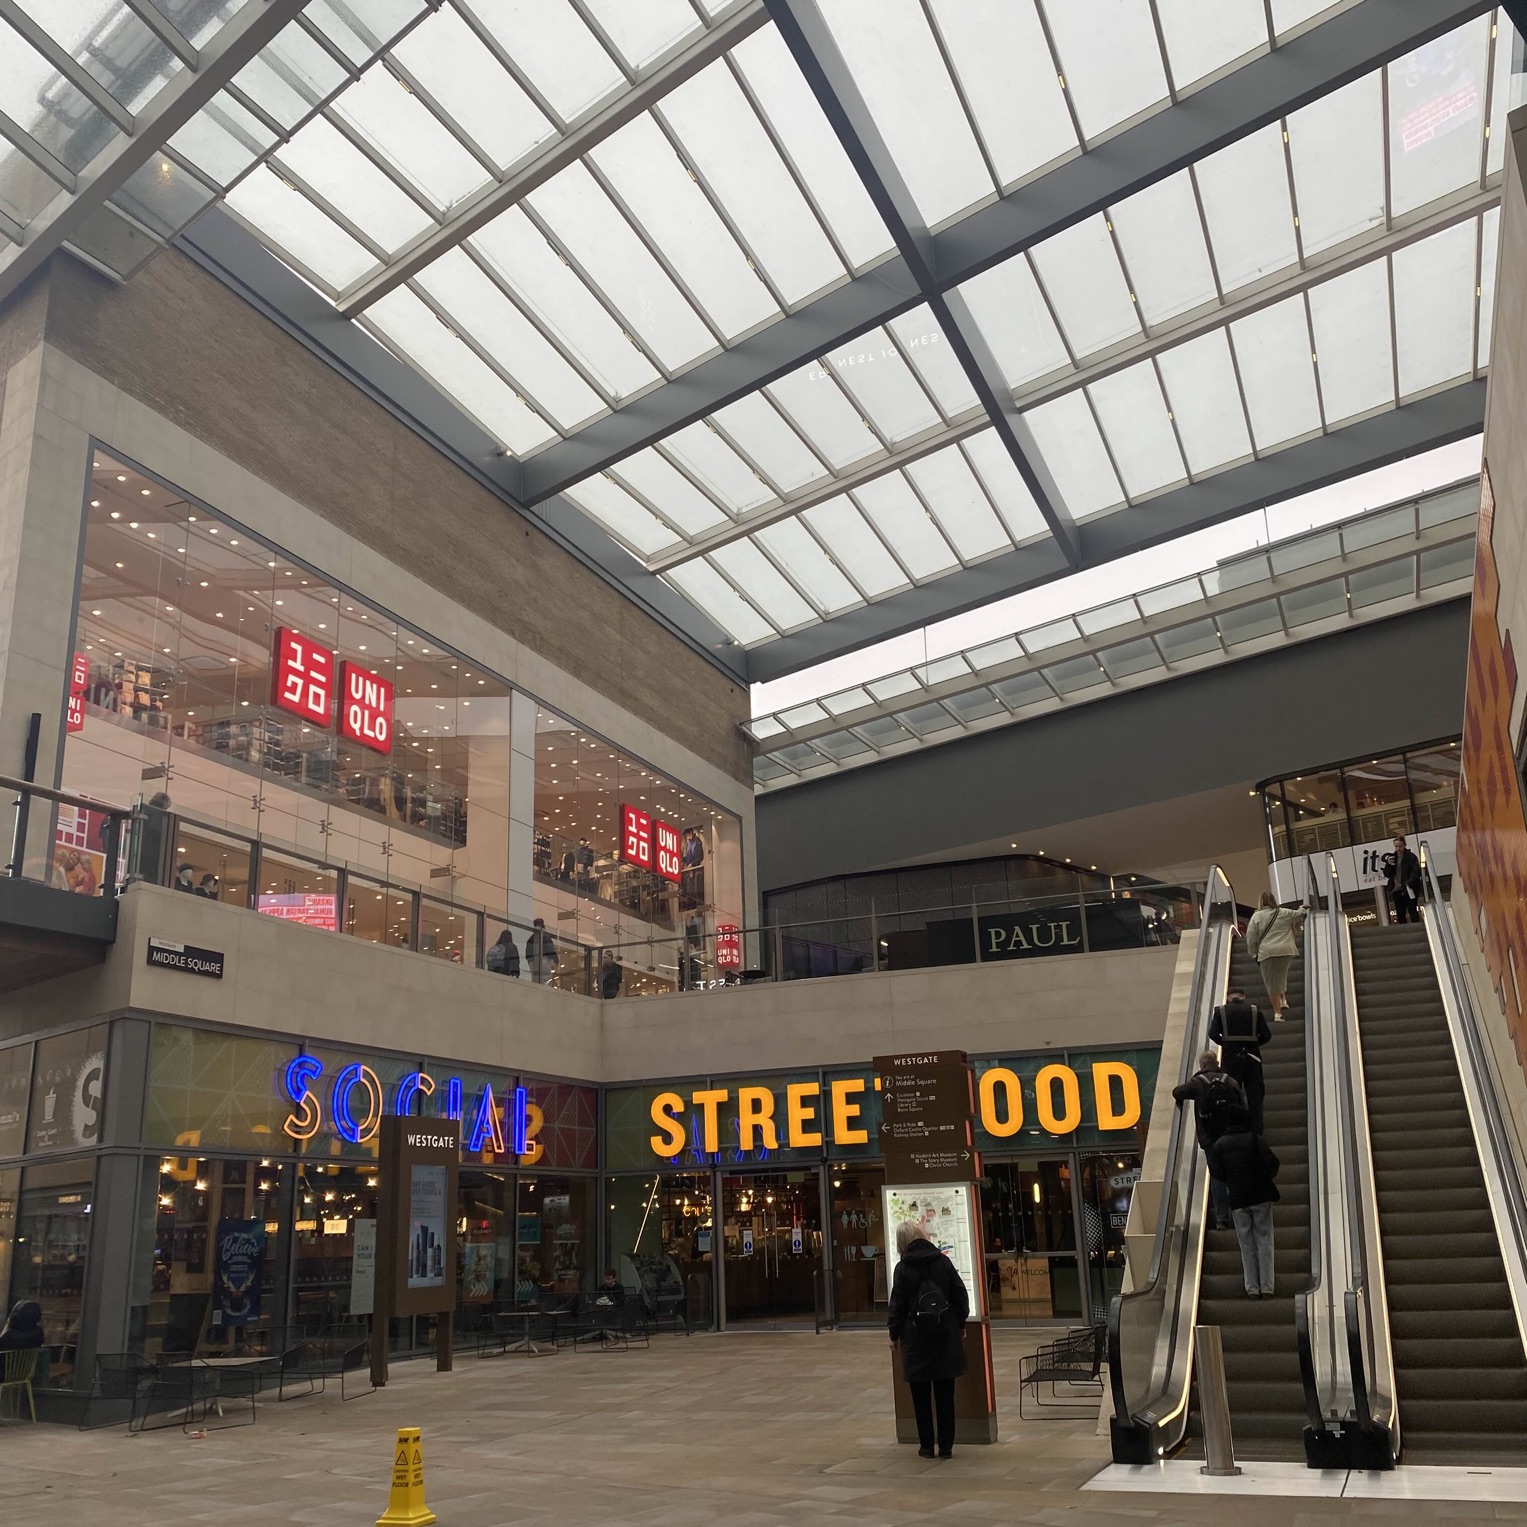 Westgate shopping mall,Oxford | Trip.com Oxford Travelogues